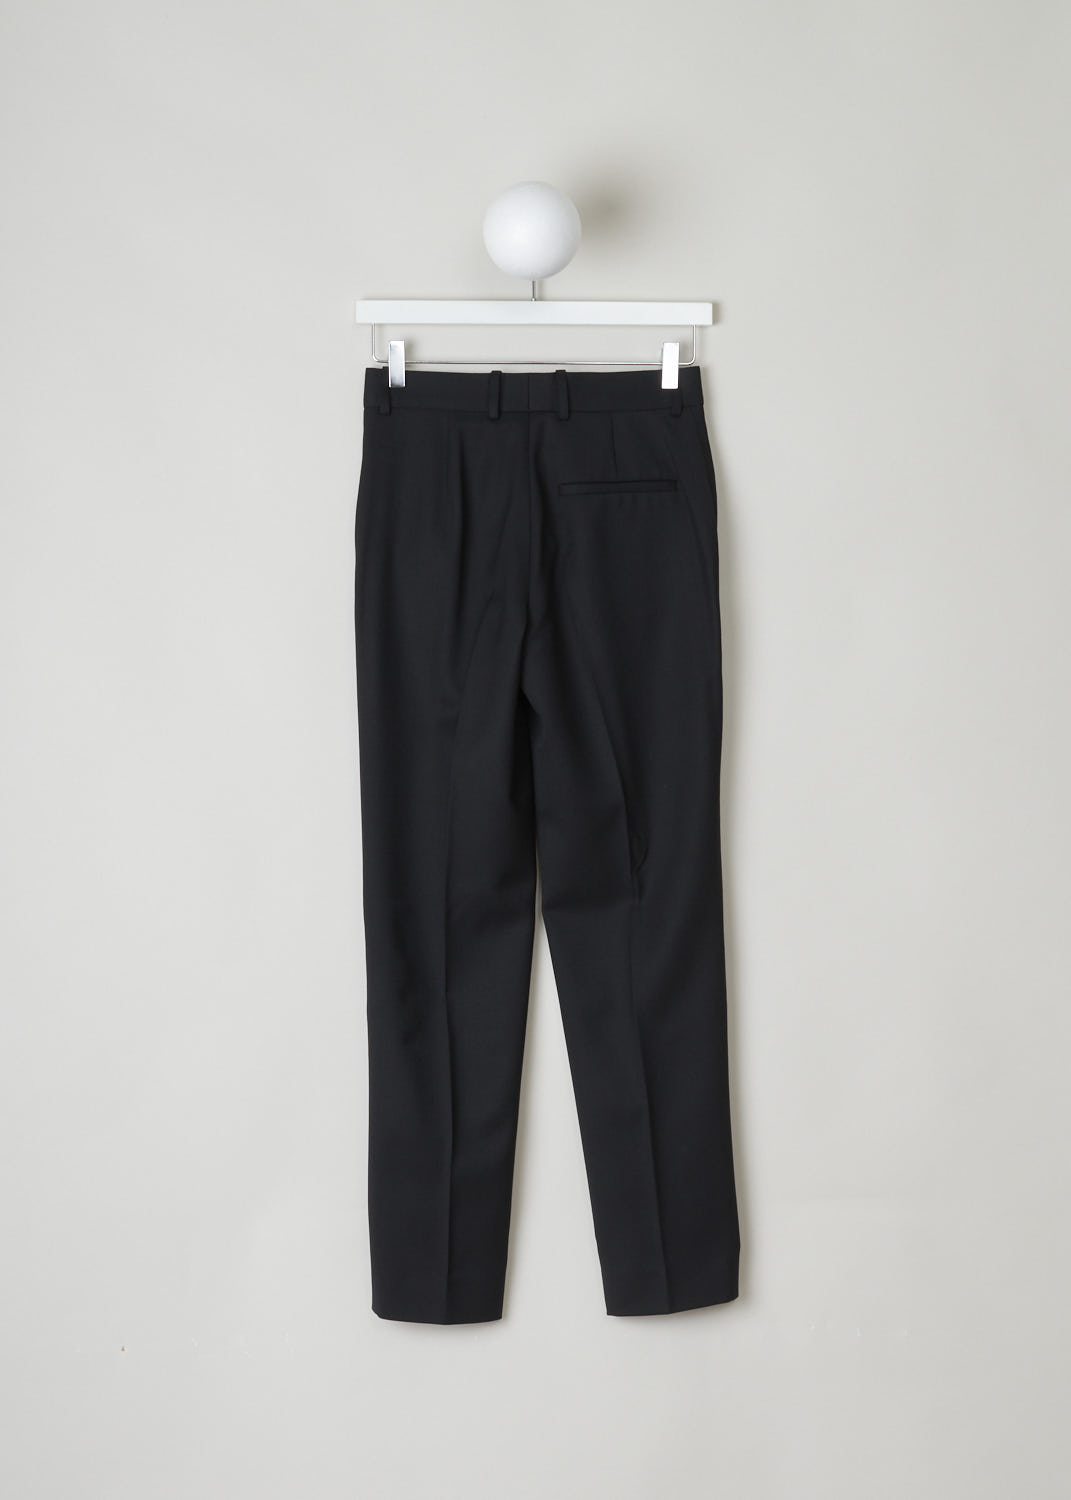 BALENCIAGA, CLASSIC BLACK PANTS, 556169_TDT06_1000, Black, Back, Classic straight legged pants with a center crease. The pants comes with a button and zipper closure. The wide waistband has belt loops. The pants has side pockets on either side, as well as a single welt pocket in the back. 
